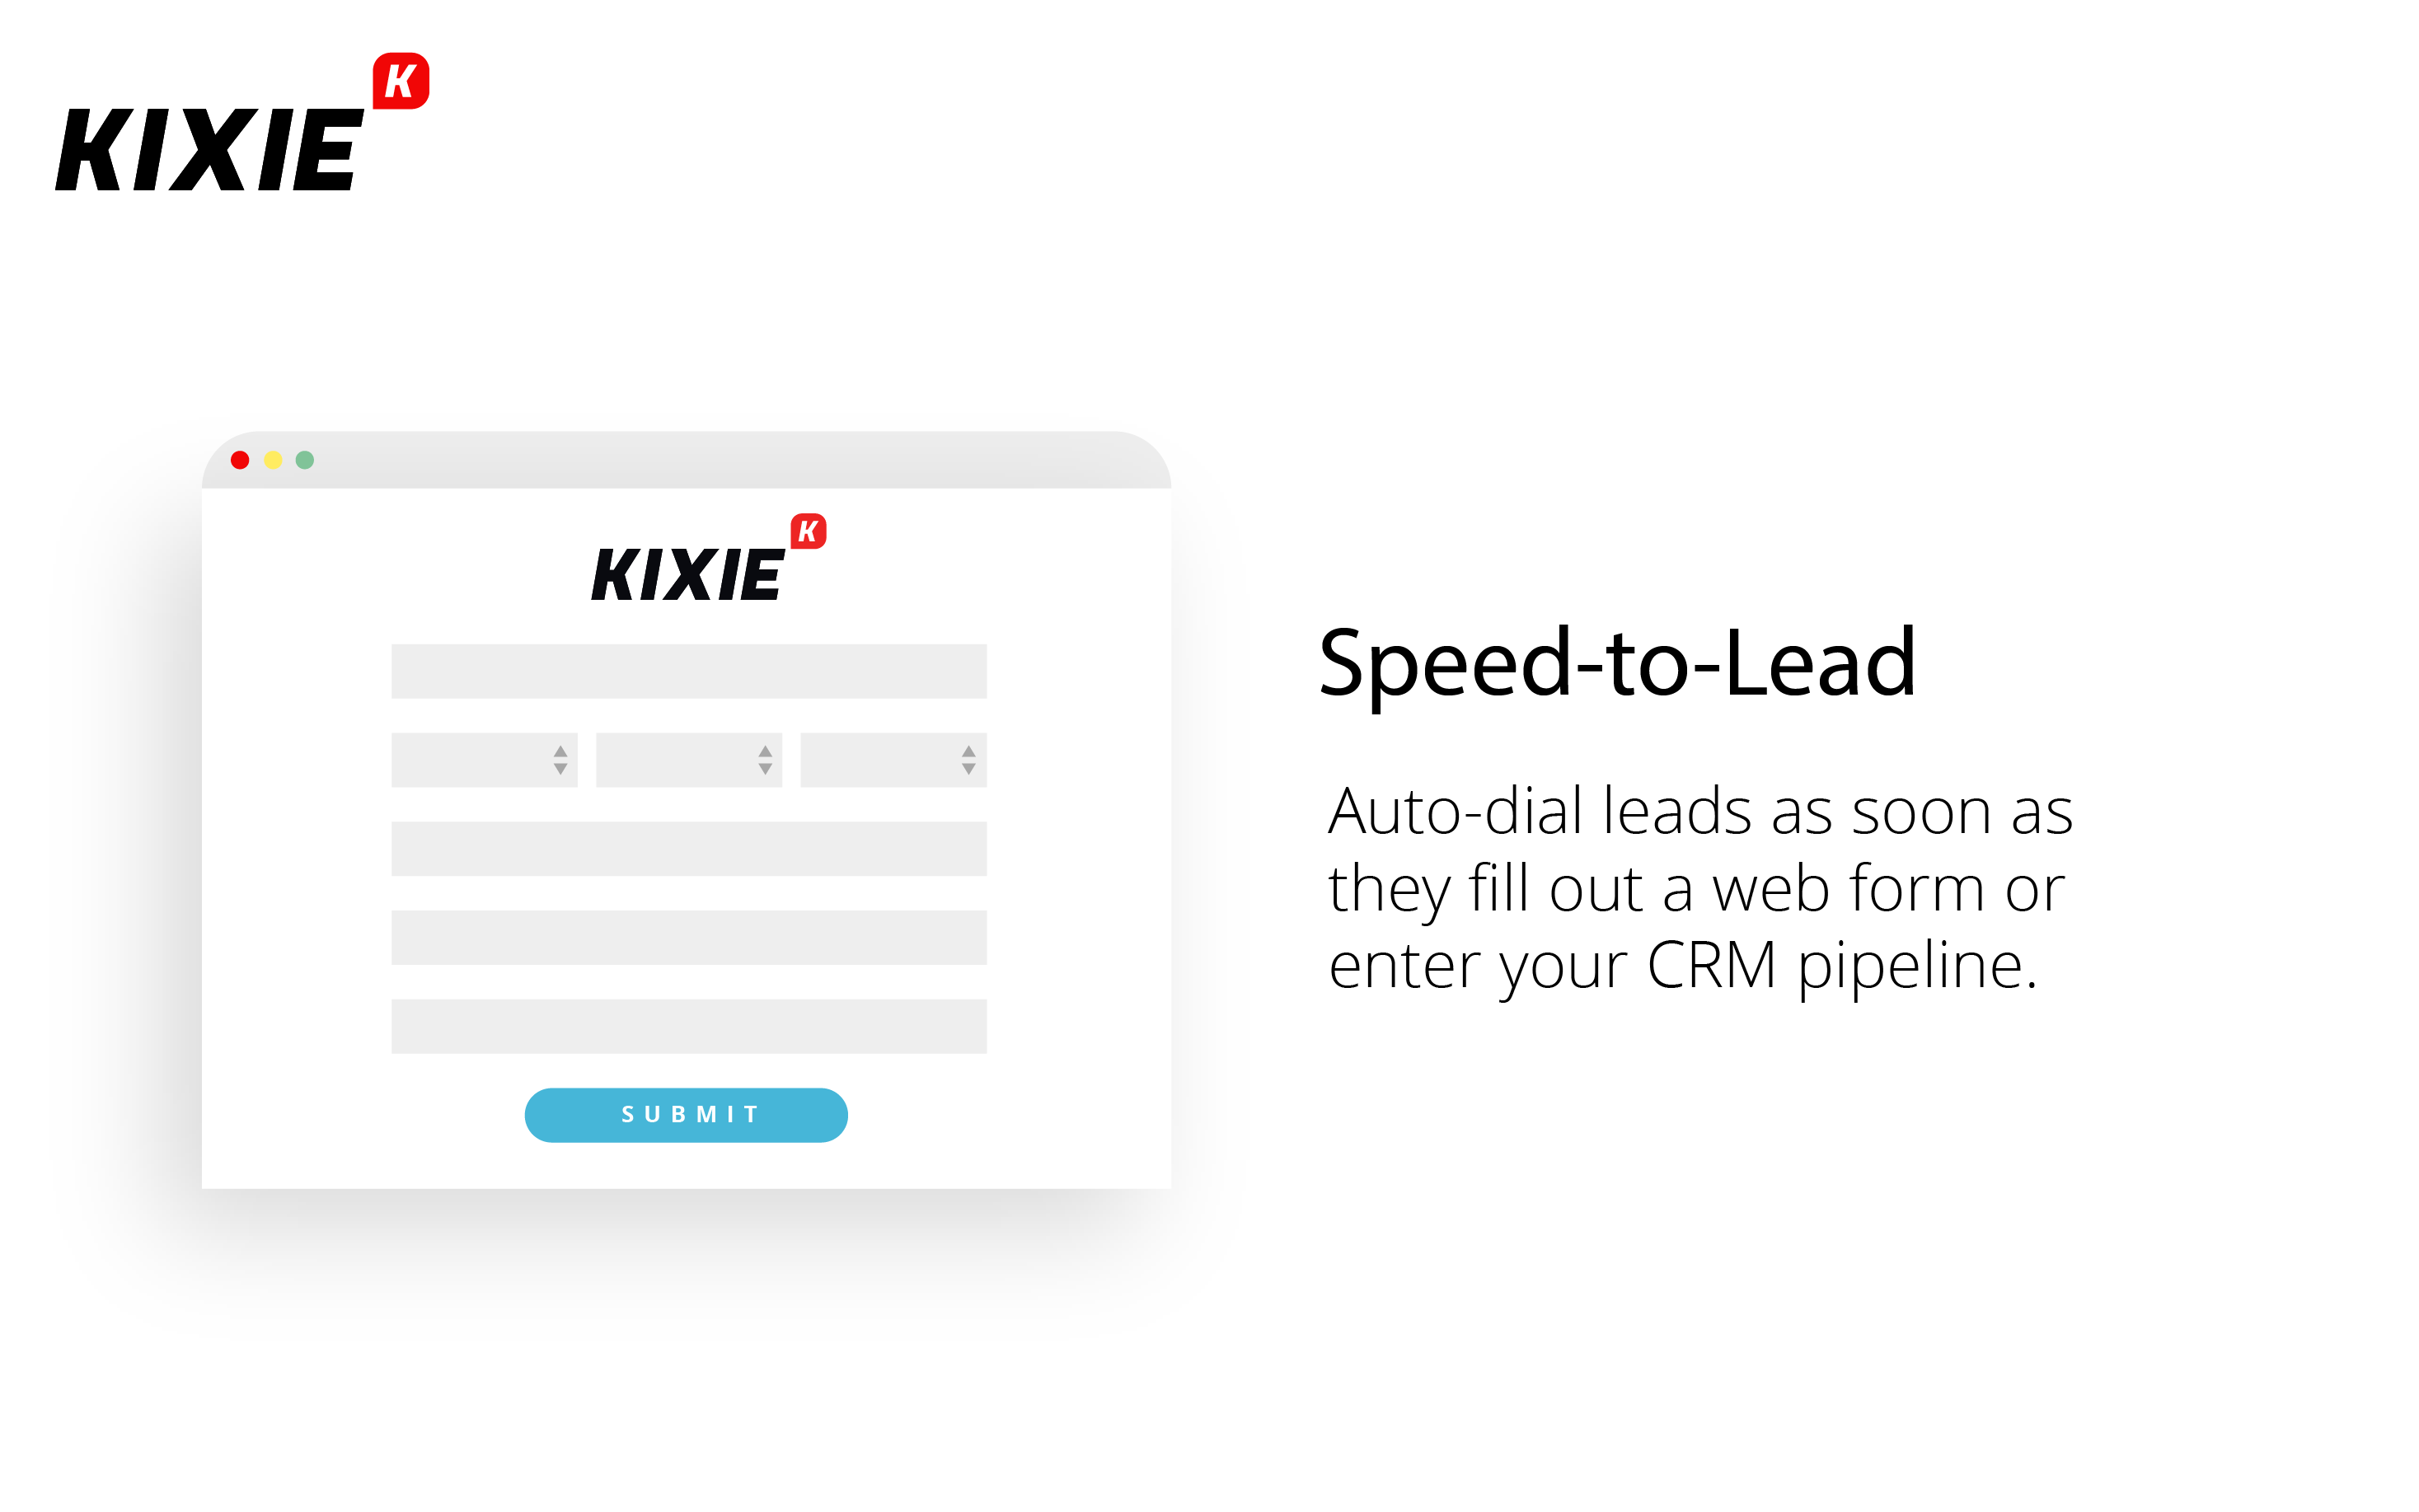 Kixie PowerCall Software - Speed-to-lead. Automatically call or text leads within seconds.